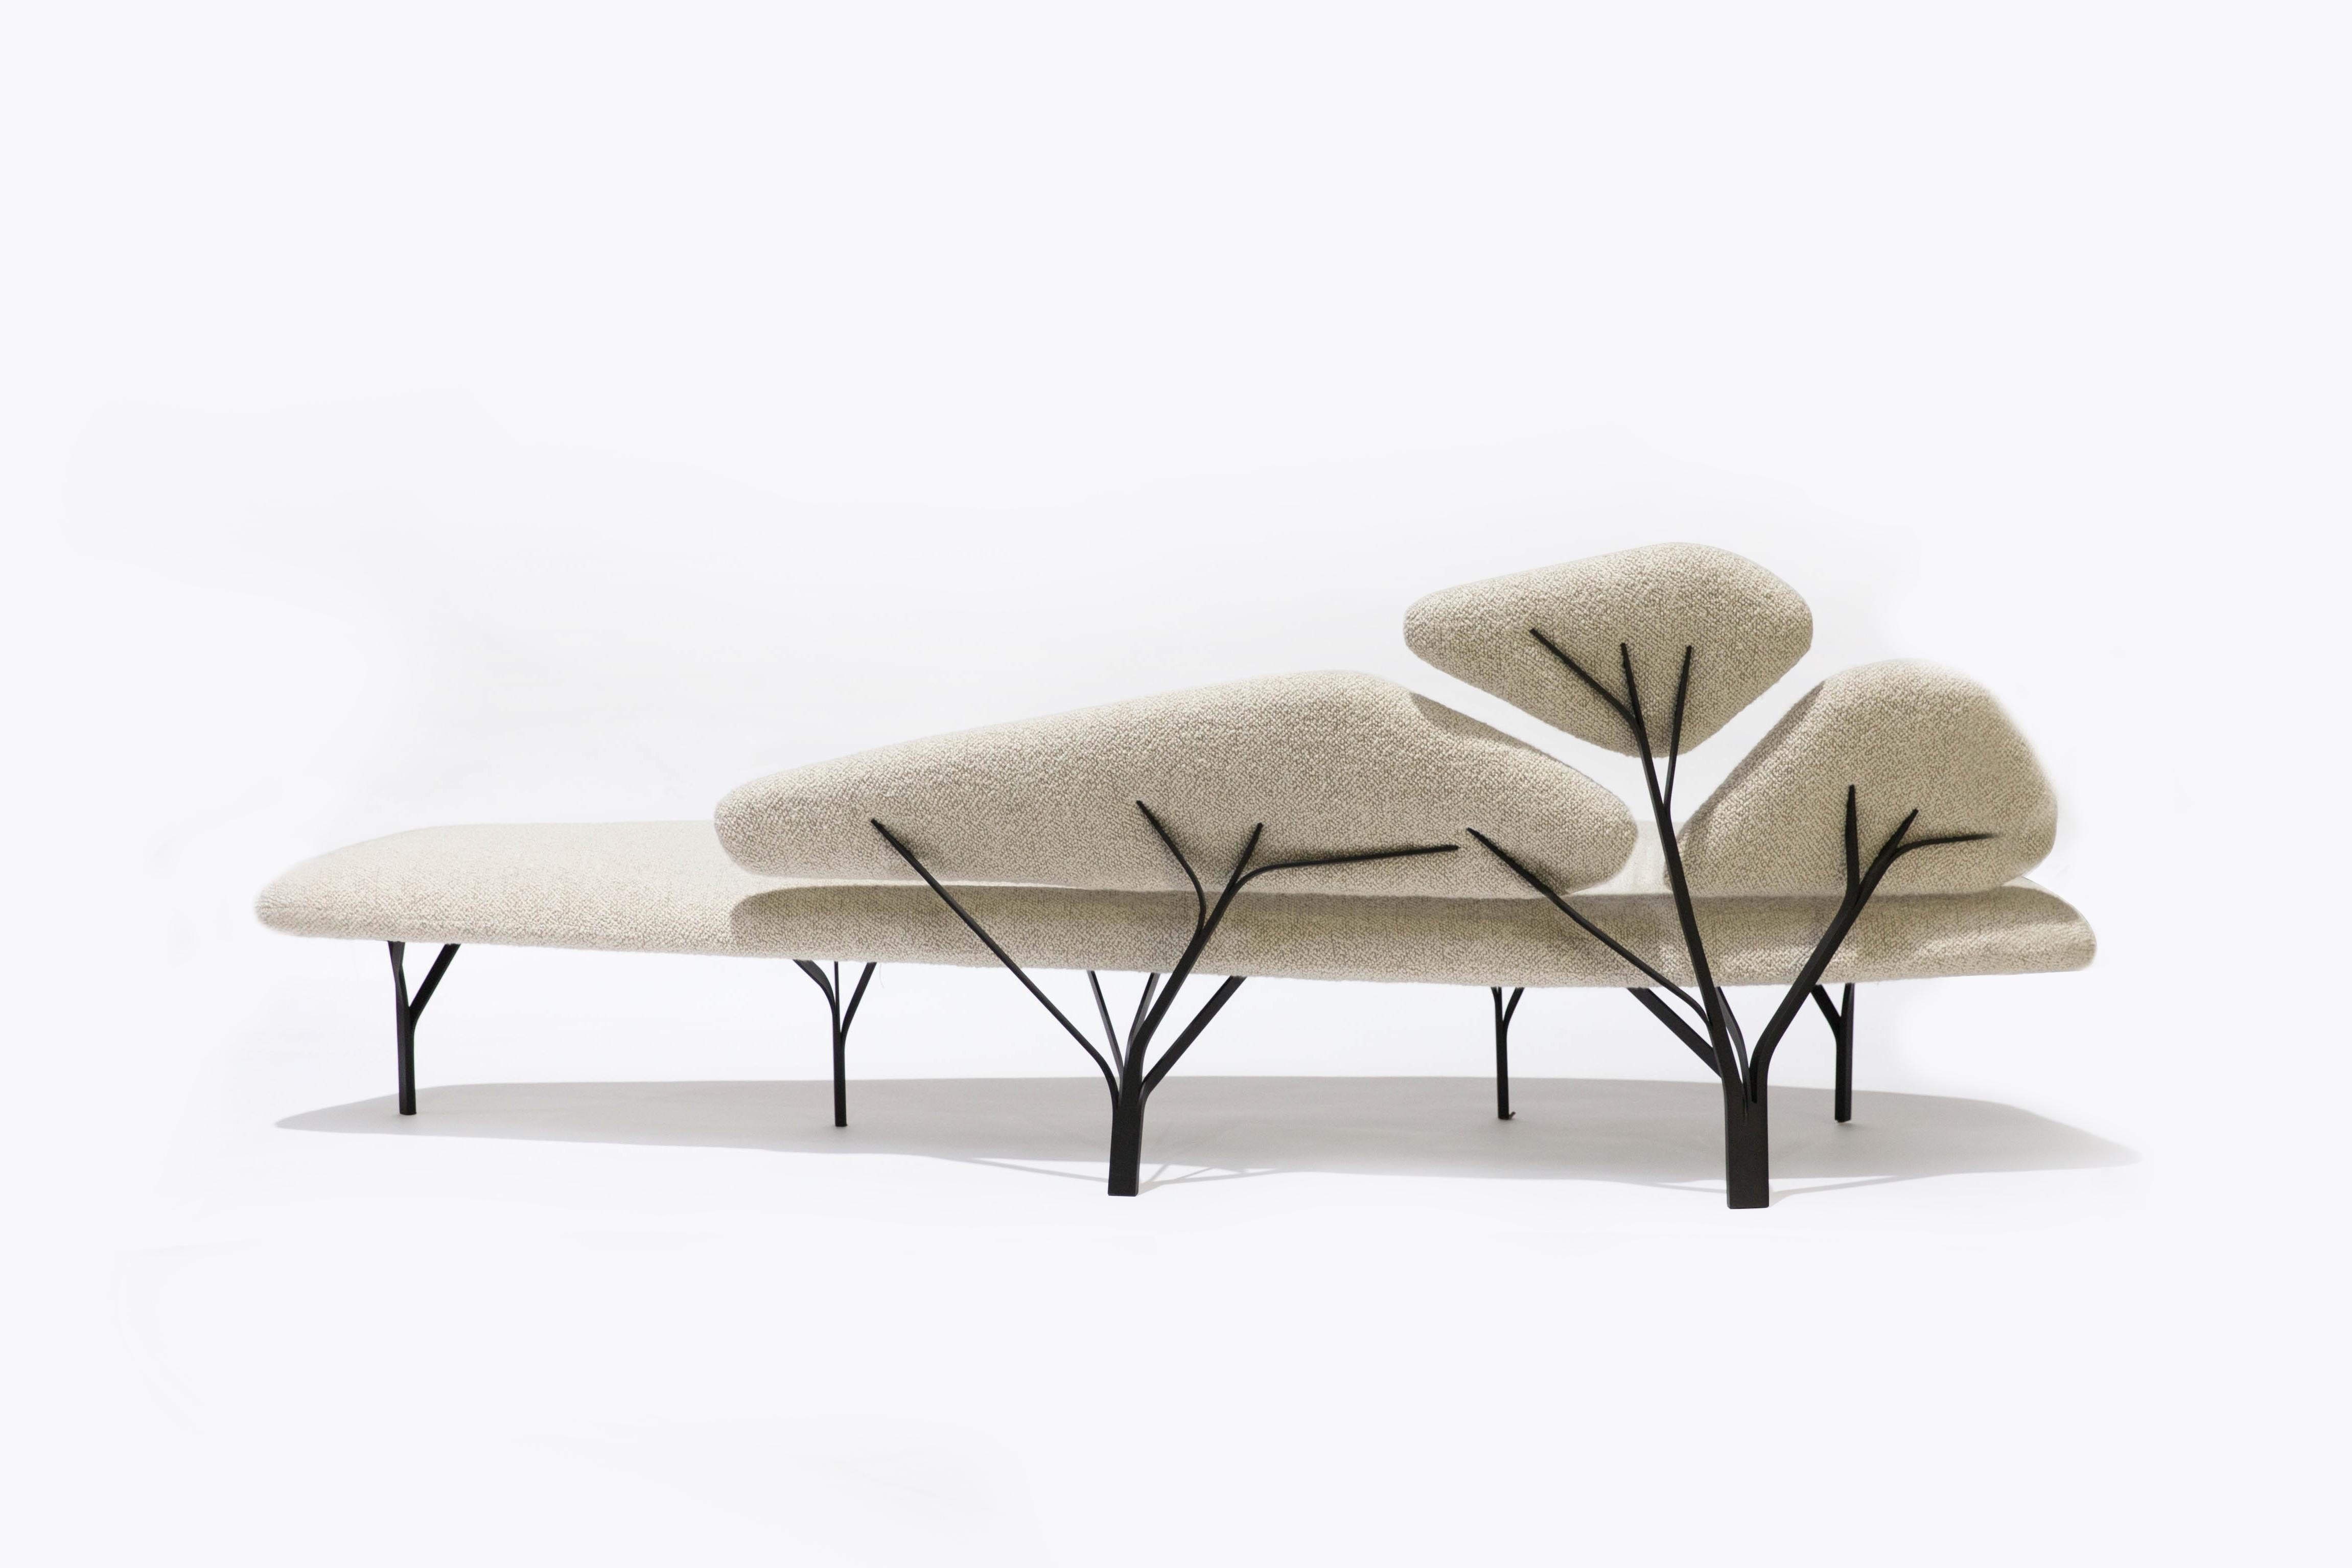 Special edition Pierre Frey Fabric - Borghese sofa - Noé Duchaufour Lawrance

Borghese is a light sofa inspired by the stone pines of the Villa Borghese in Roma. The metal structure reproduces the network of branches and supports the back